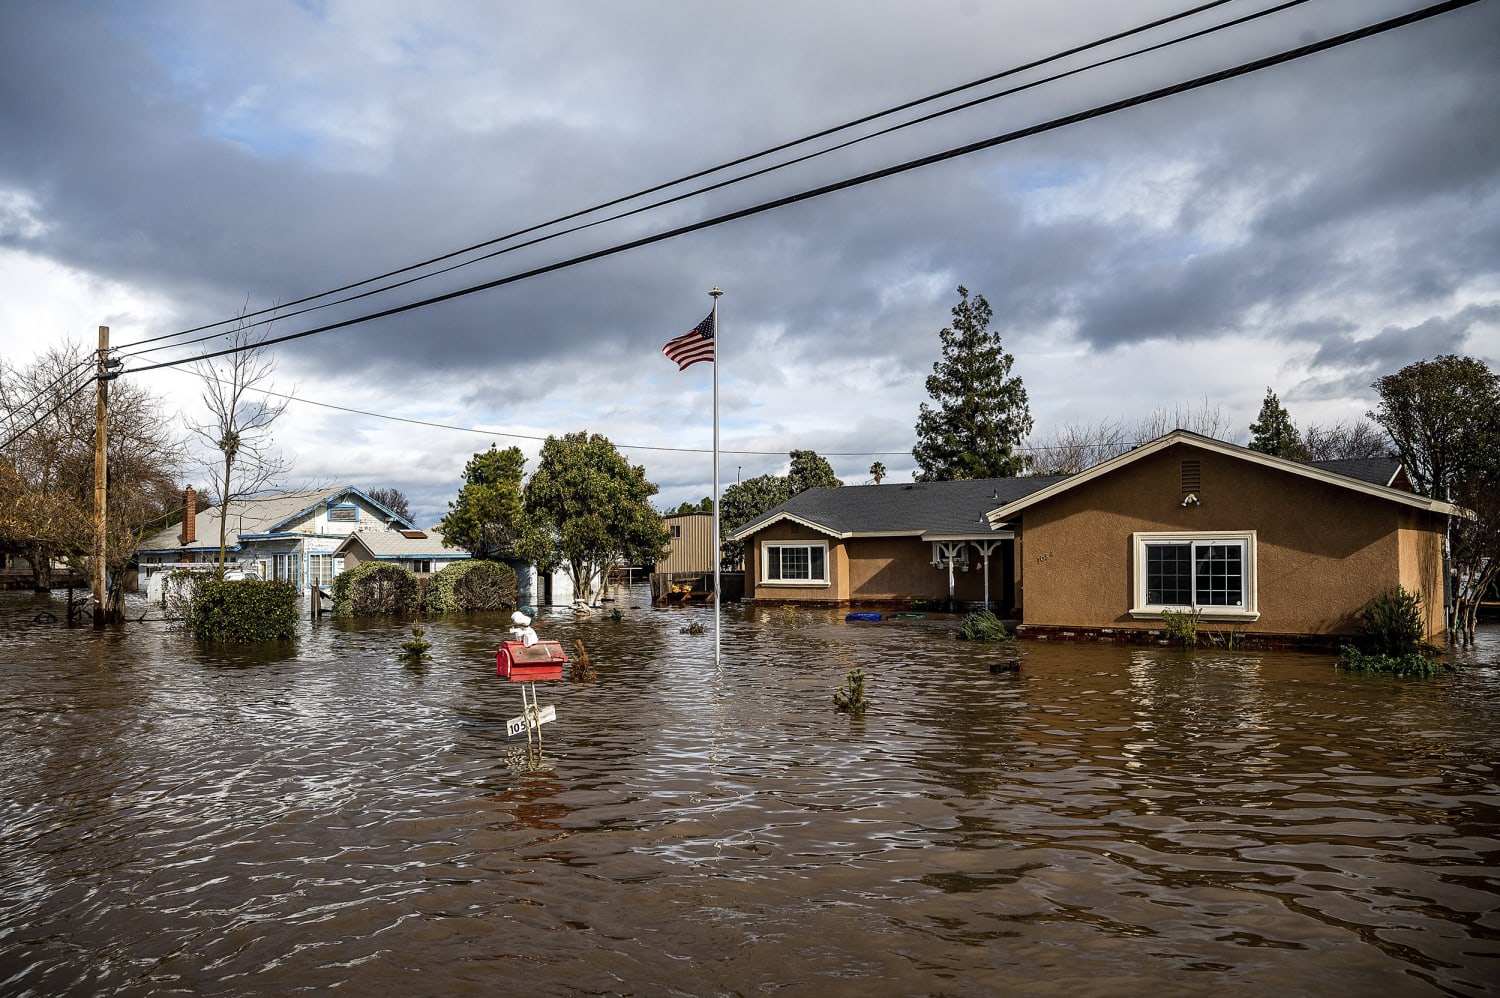 Roads turn to rivers as storms drench California, claiming lives and leaving many in the dark